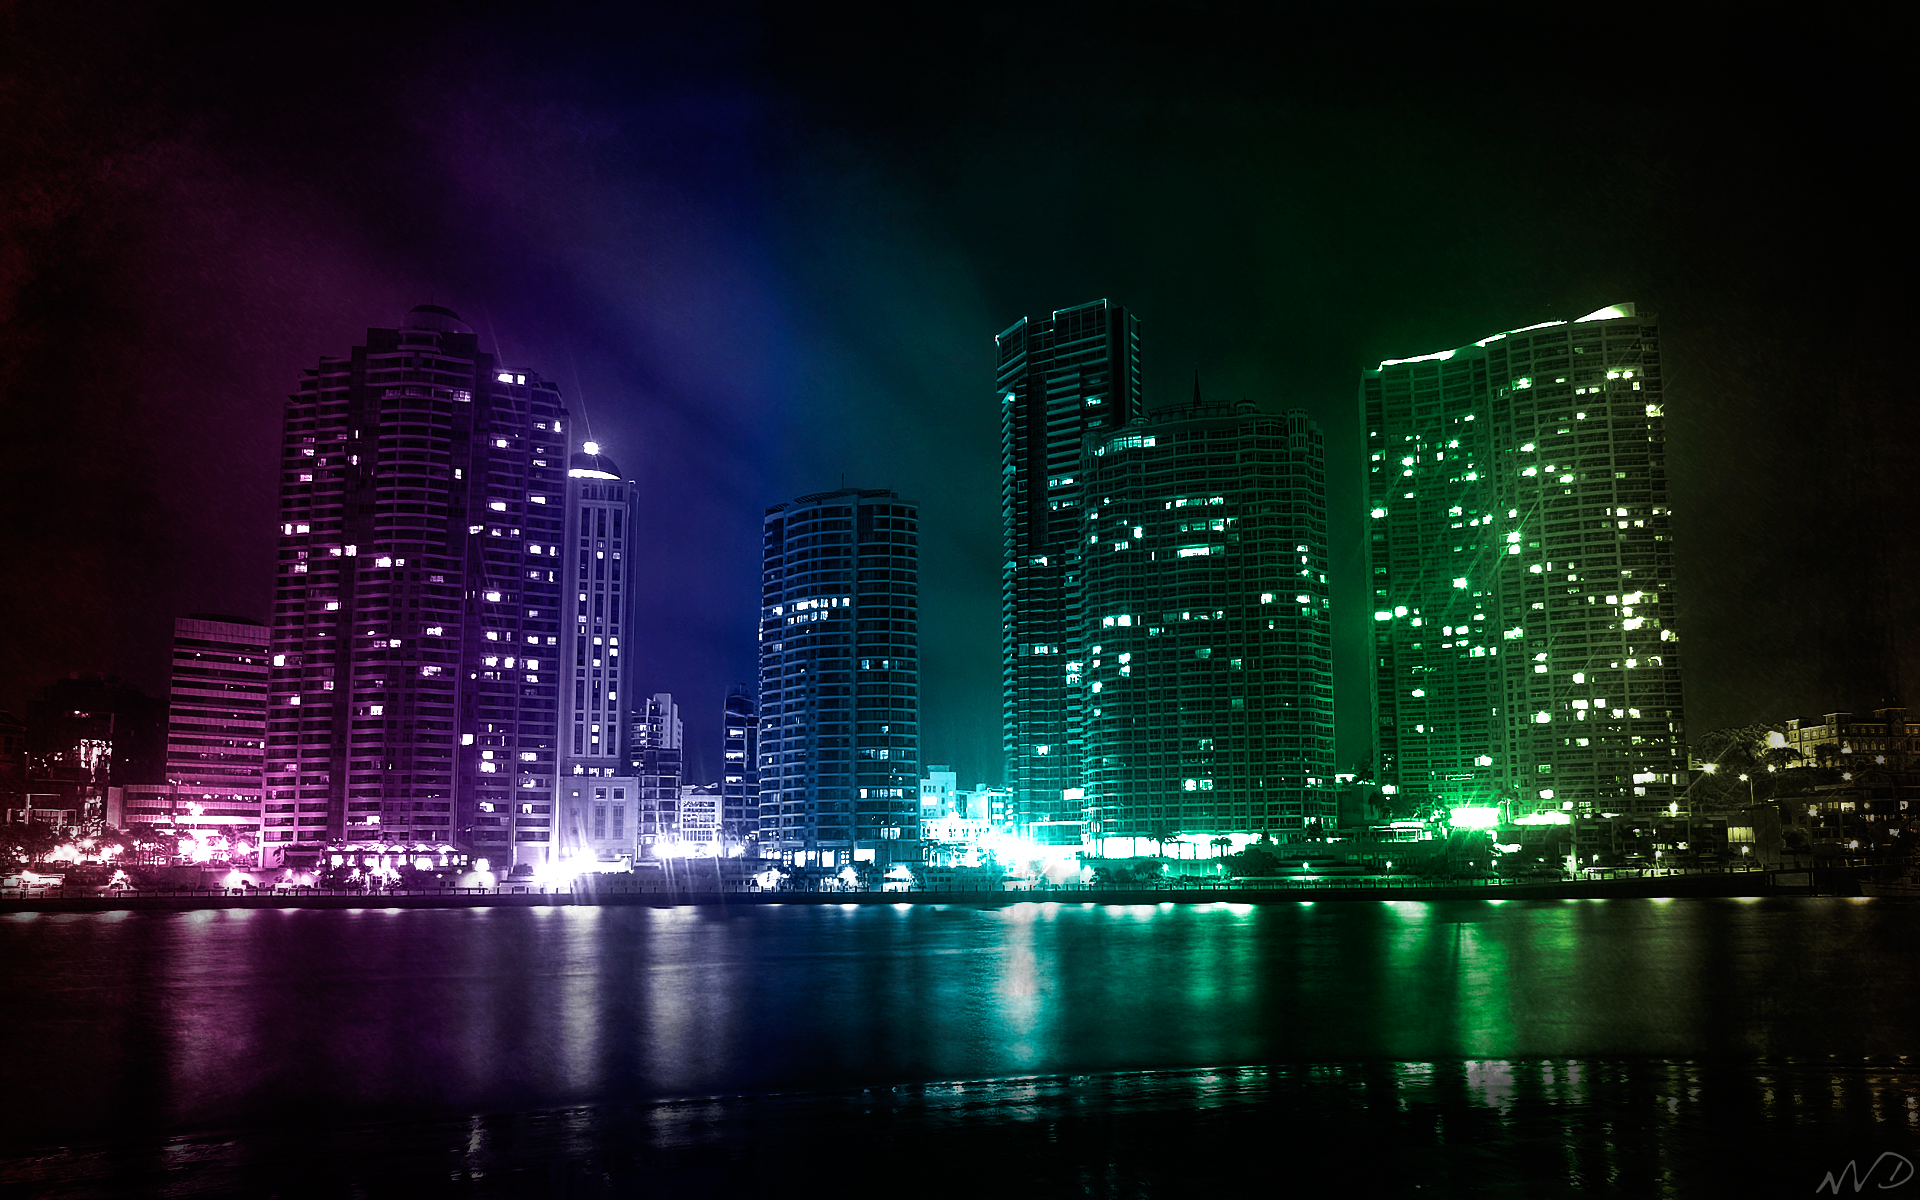 Free Download City Lights Hd Wallpapers 1080p 19x10 For Your Desktop Mobile Tablet Explore 46 Windows 10 City Wallpaper Windows 10 Wallpapers Free Download Windows 10 Mobile Official Wallpapers Microsoft Animated Wallpaper Windows 10